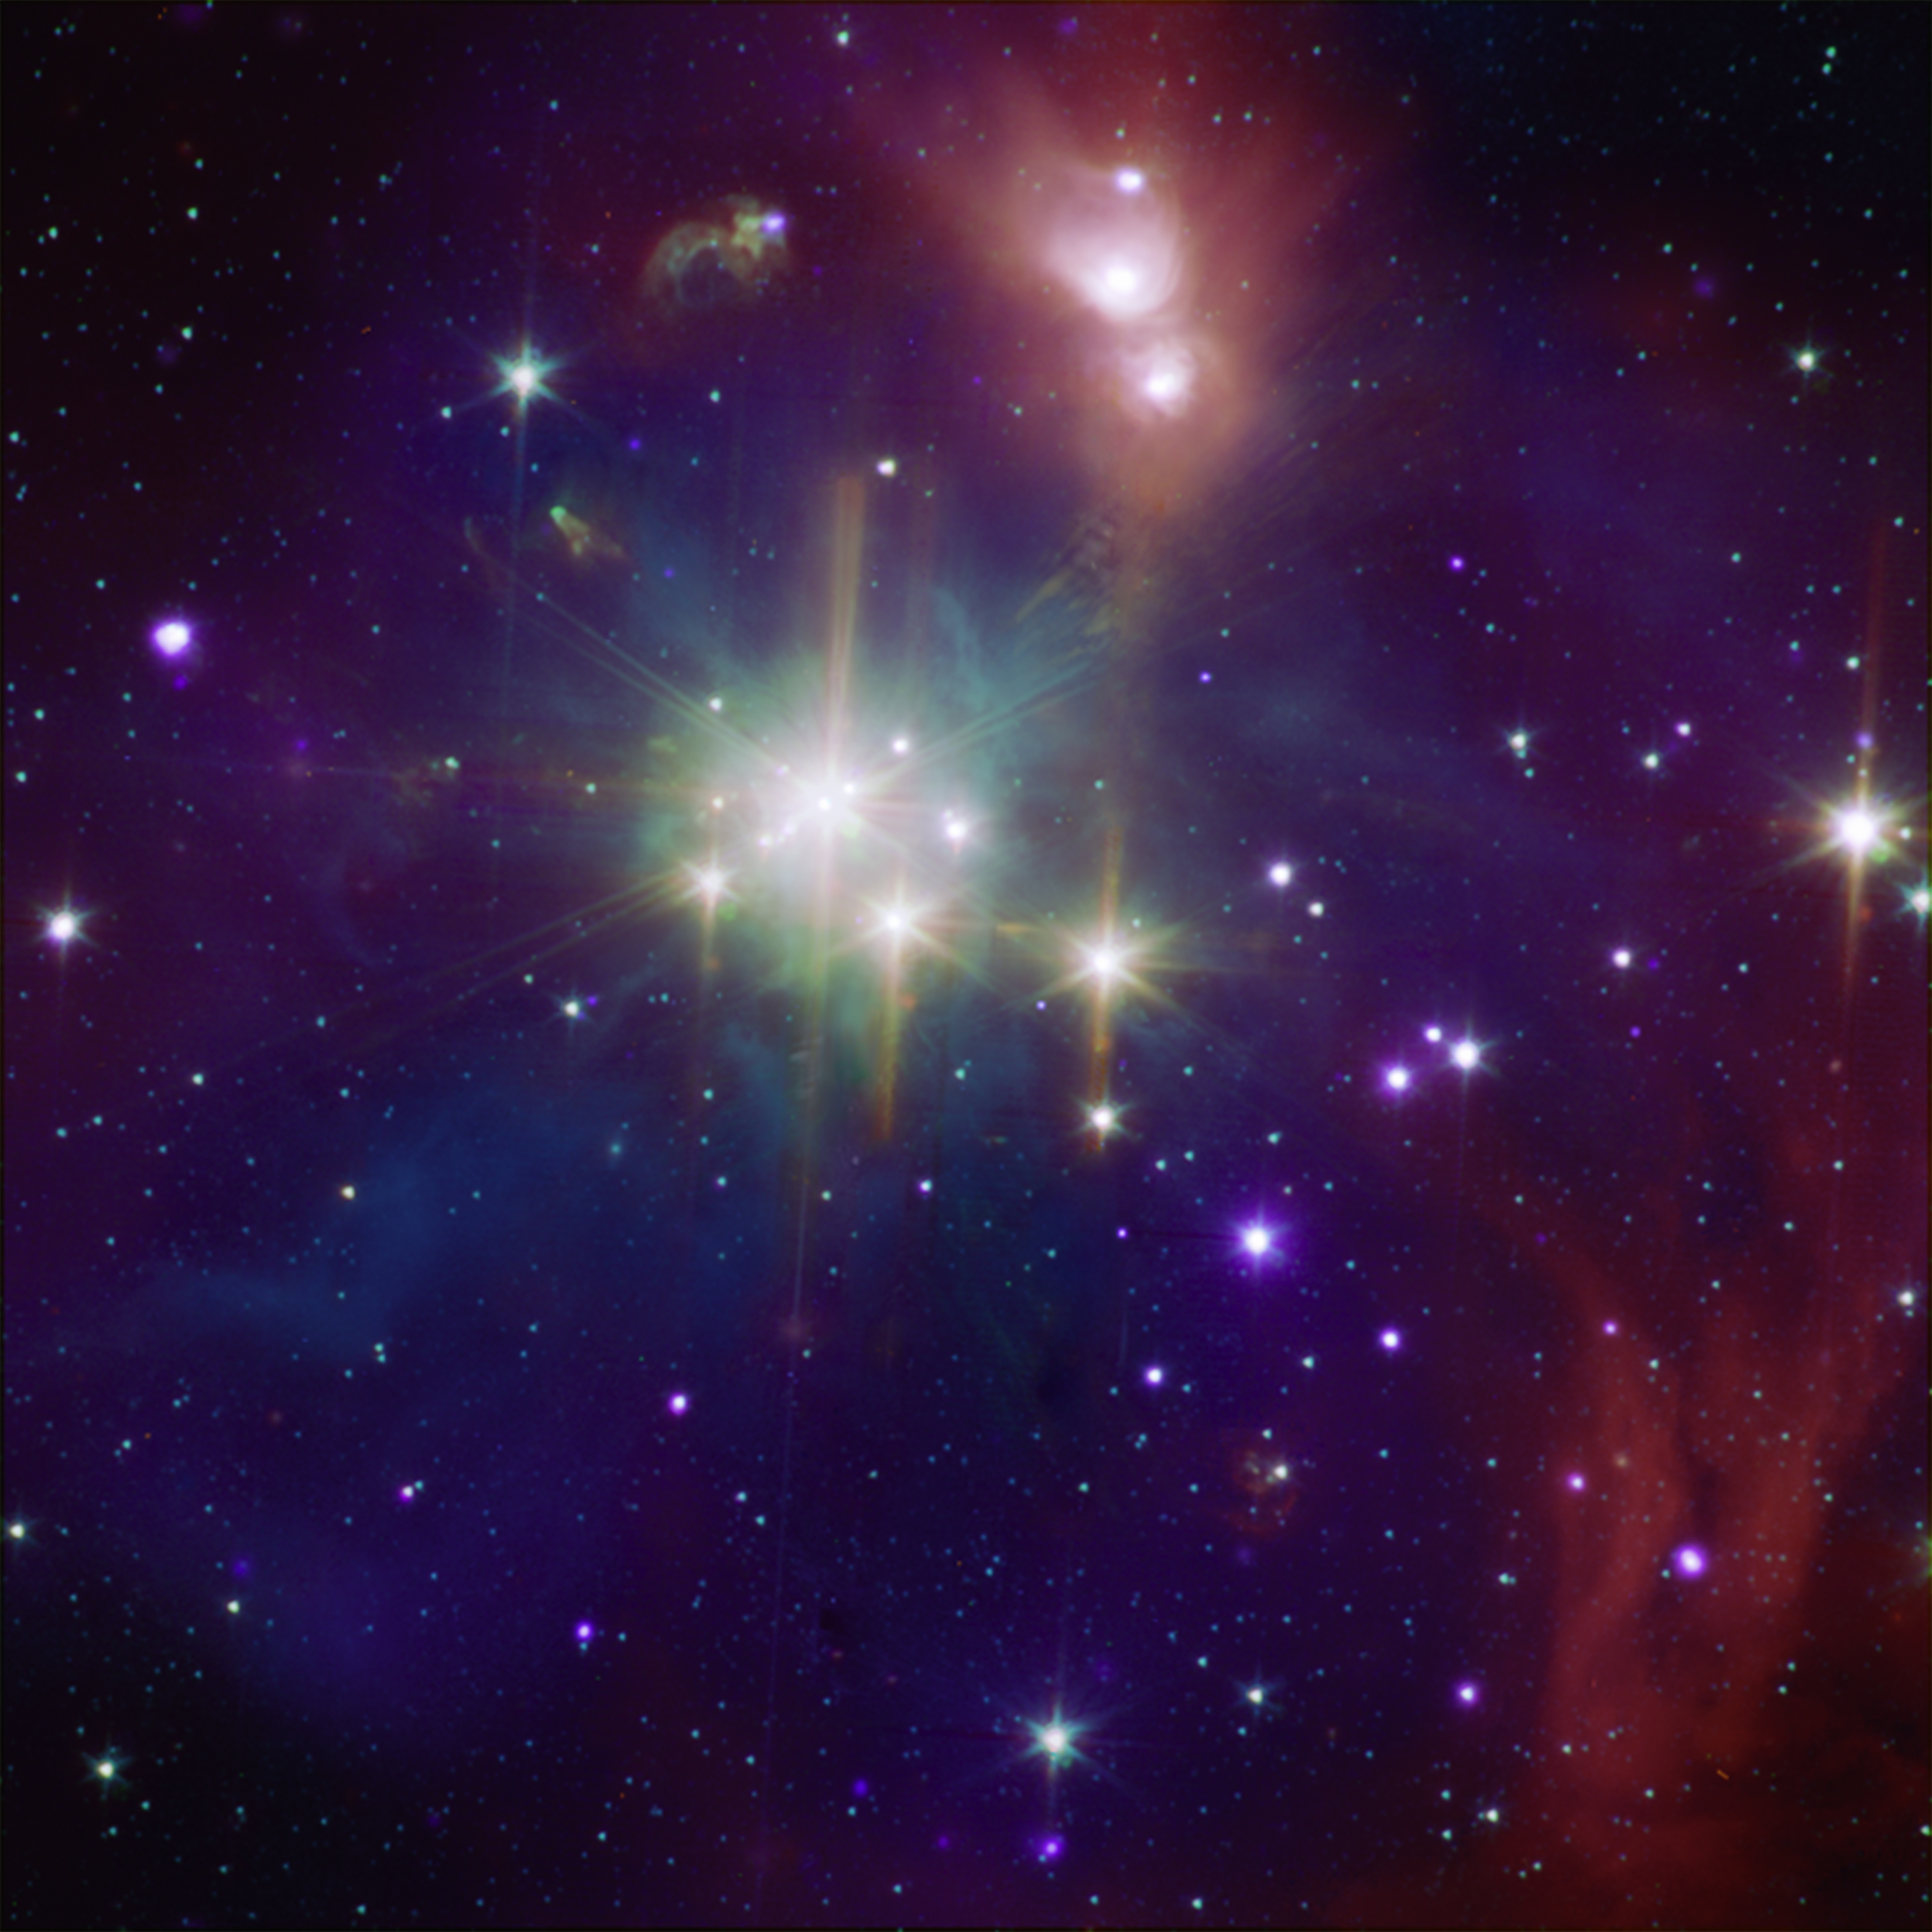 The Coronet cluster is one of the nearest and most active regions of ongoing star formation at only about 420 light-years away. The Coronet contains a loose cluster of a few dozen young stars with a wide range of masses and at various stages of evolution.